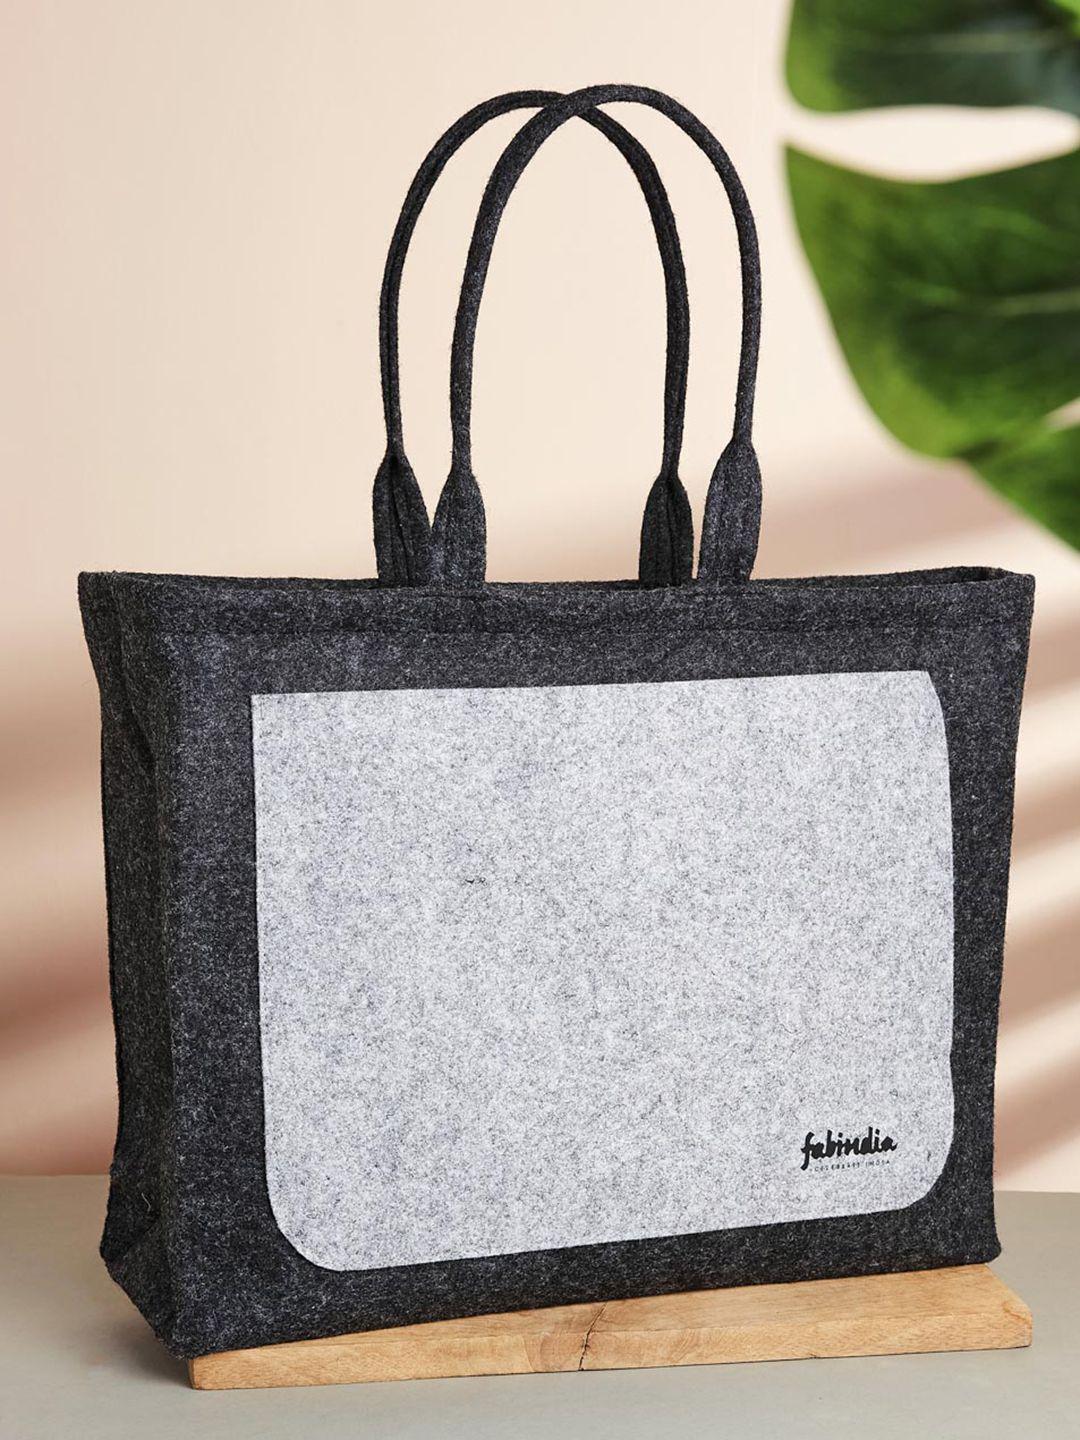 fabindia oversized swagger tote bag